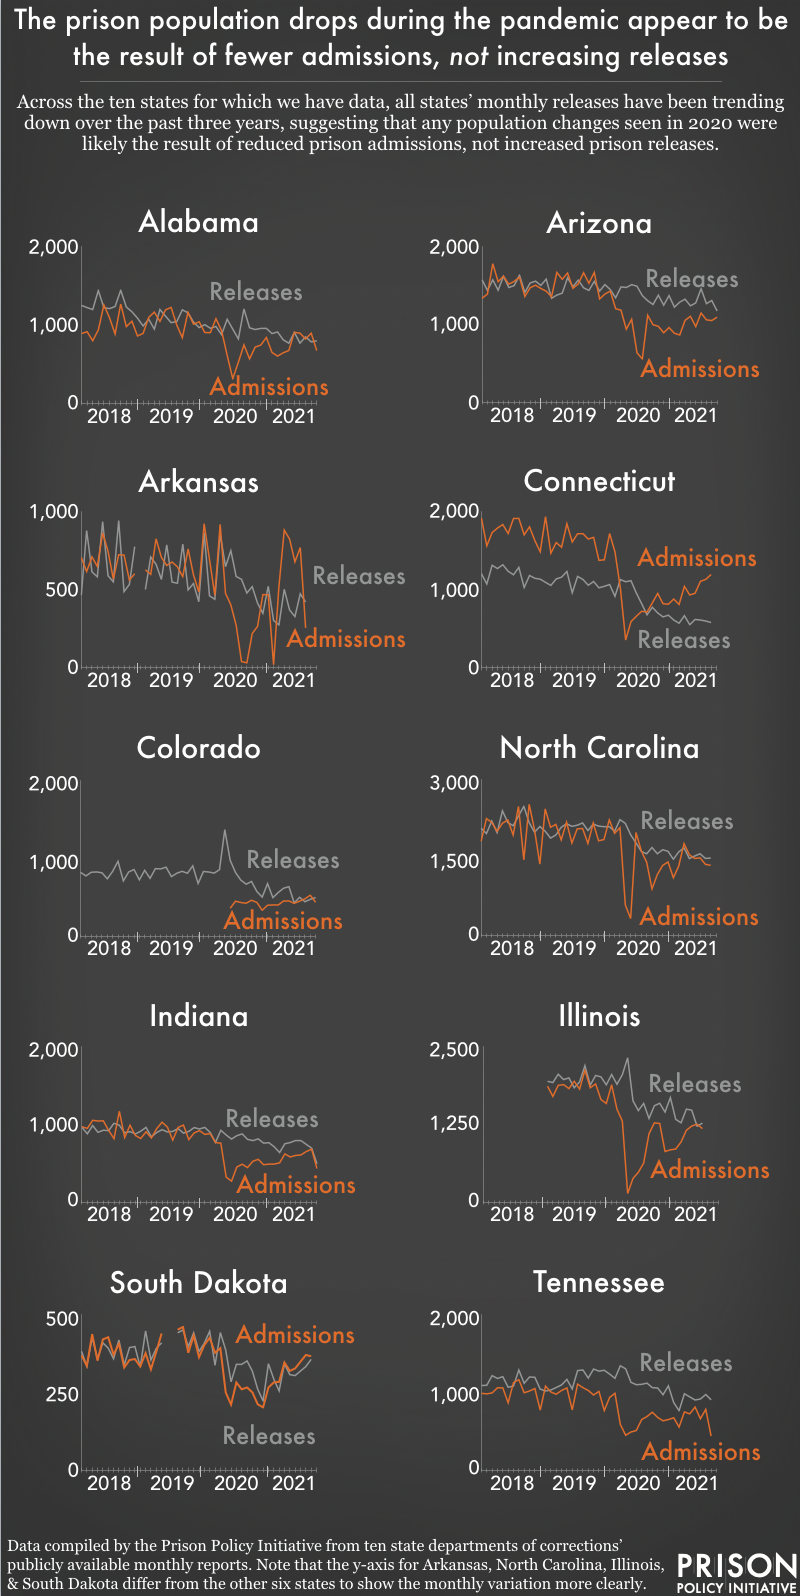 ten line graphs comparing monthly releases to admissions for ten state prison systems from 2018 to 2021